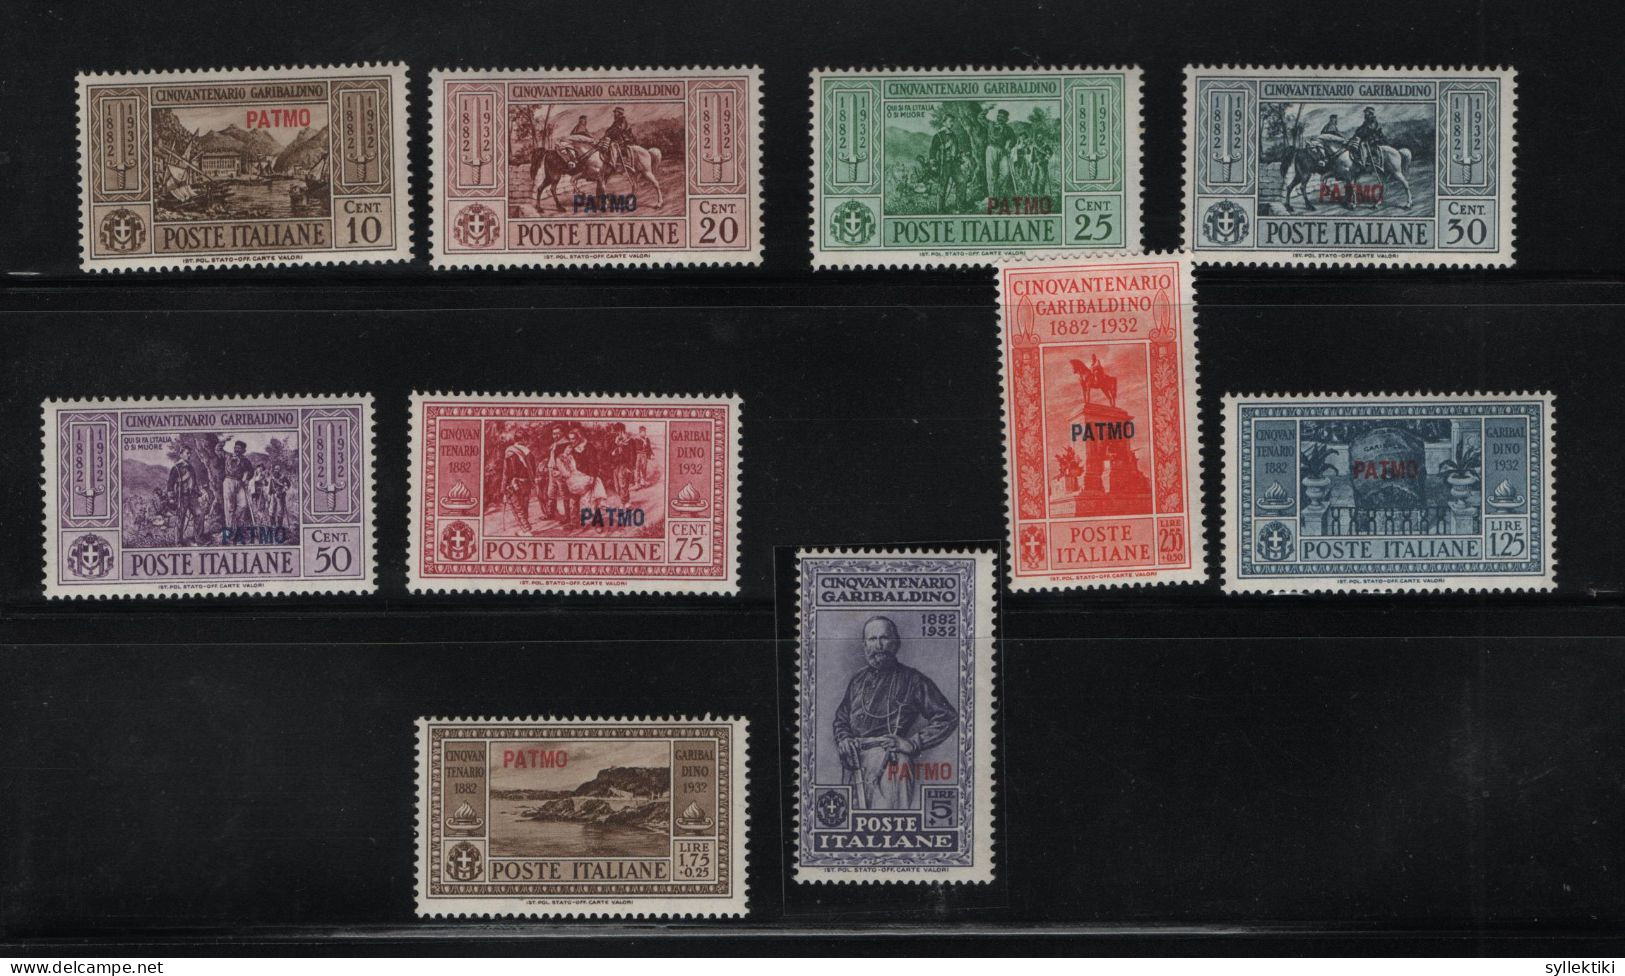 GREECE 1932 DODECANESE GARIBALDI ISSUE PATMO OVERPRINT COMPLETE SET MNH STAMPS   HELLAS No 108XI - 117XI AND VALUE EURO - Dodecaneso